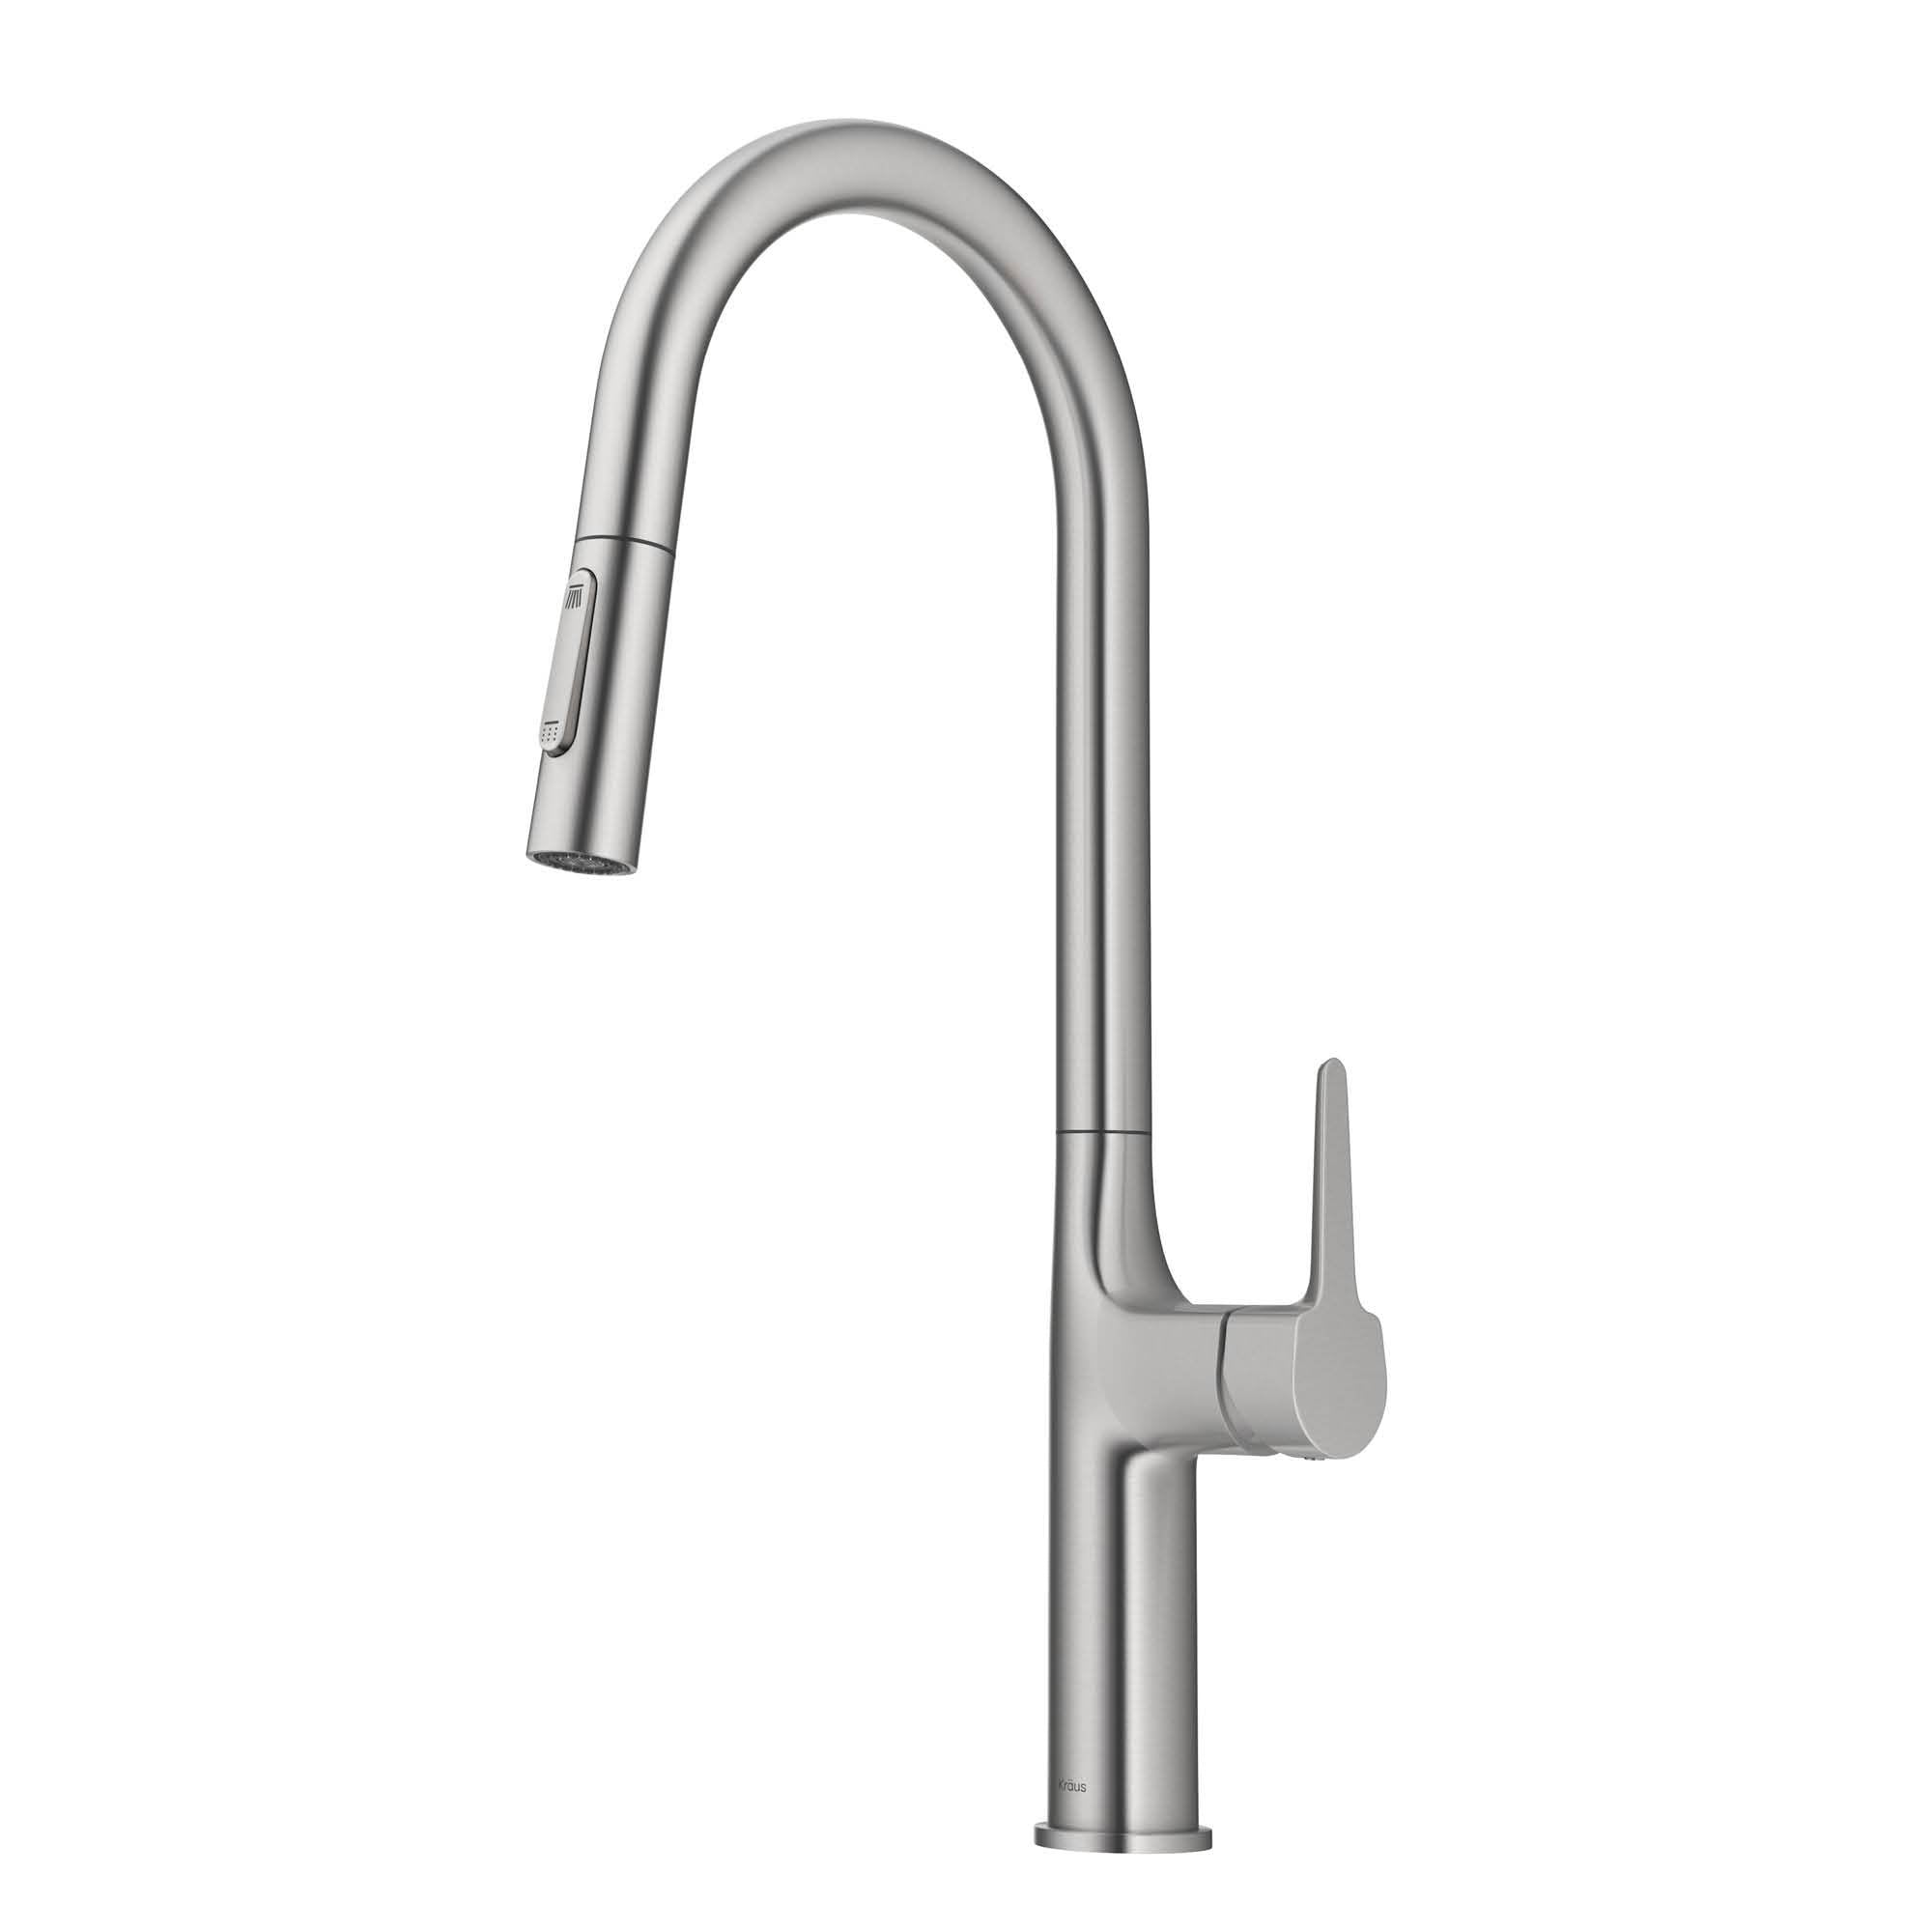 KRAUS New Oletto Modern Single Handle Pull Down Kitchen Faucet in Spot Free Stainless Steel KPF-3101SFS | DirectSinks